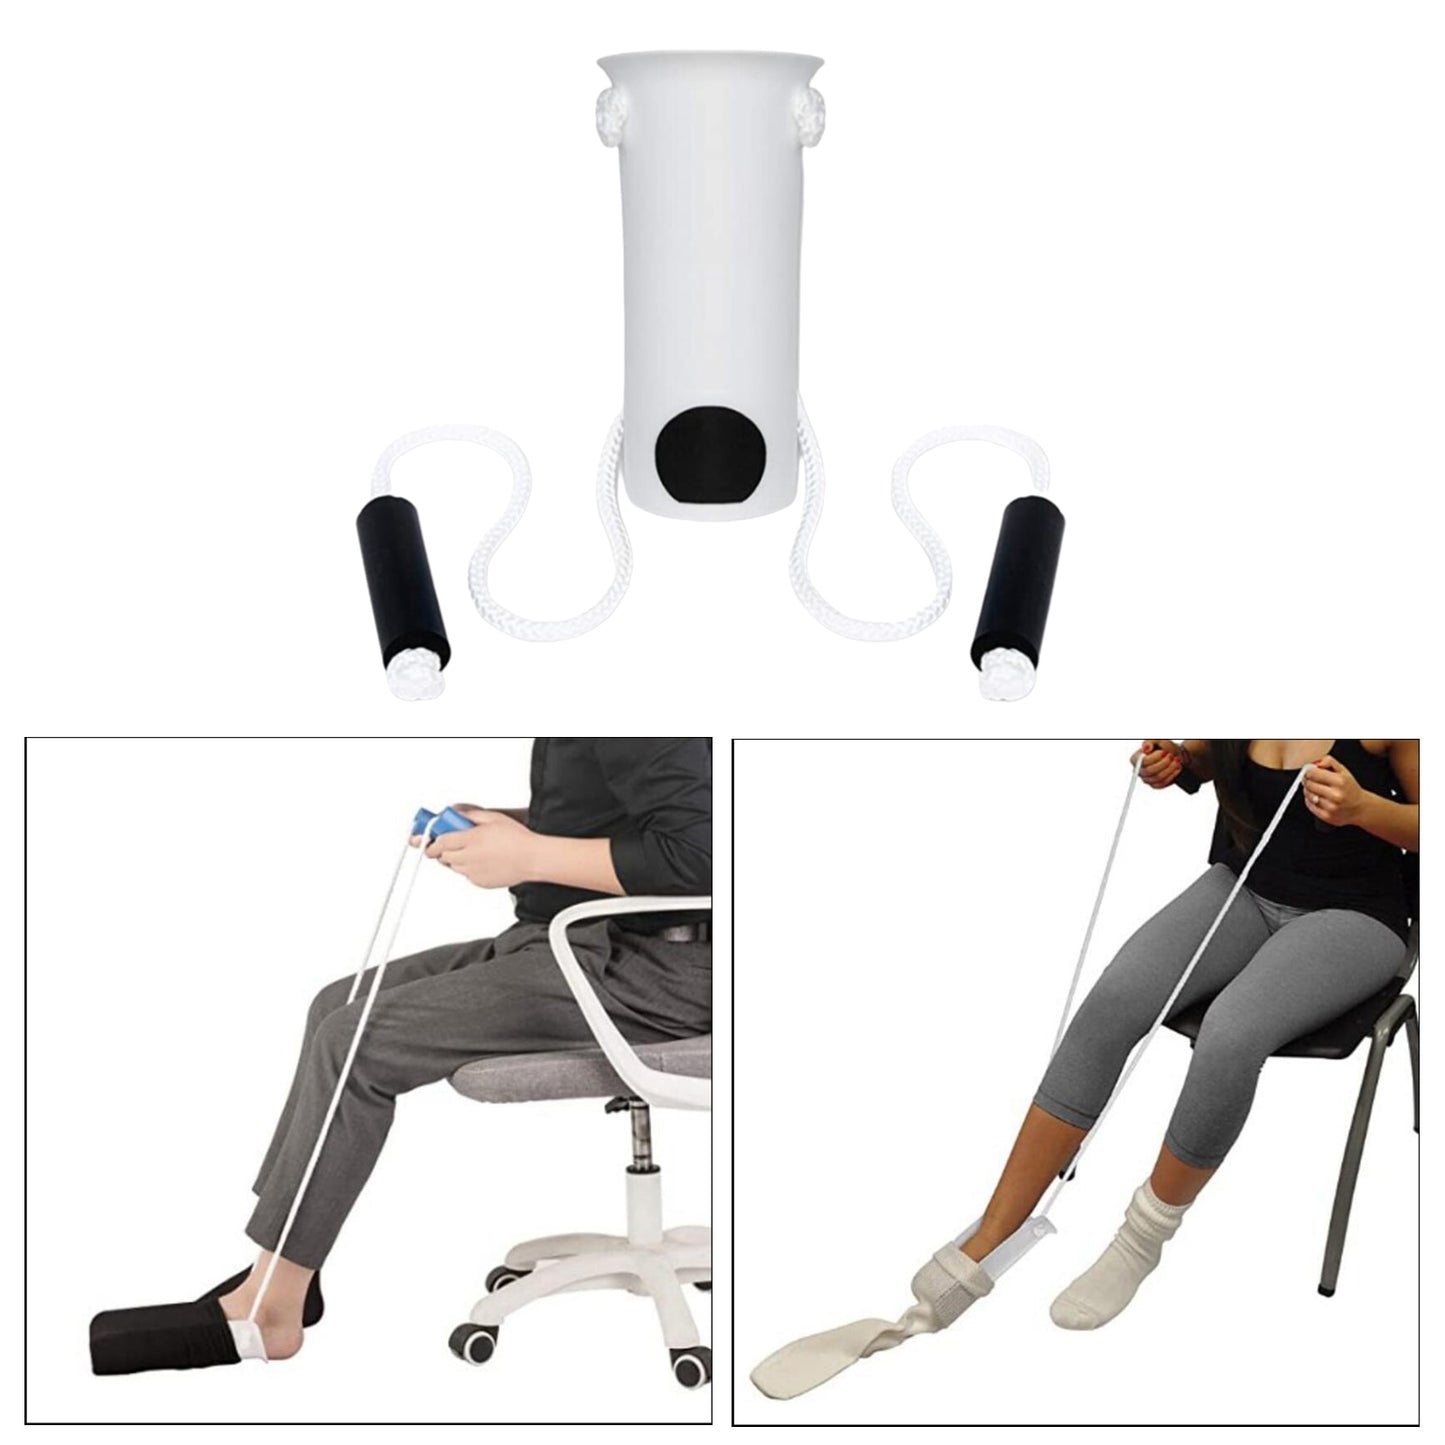 Flexible Sock Aid Easy on Off Pulling Assist Device Easy On and Off